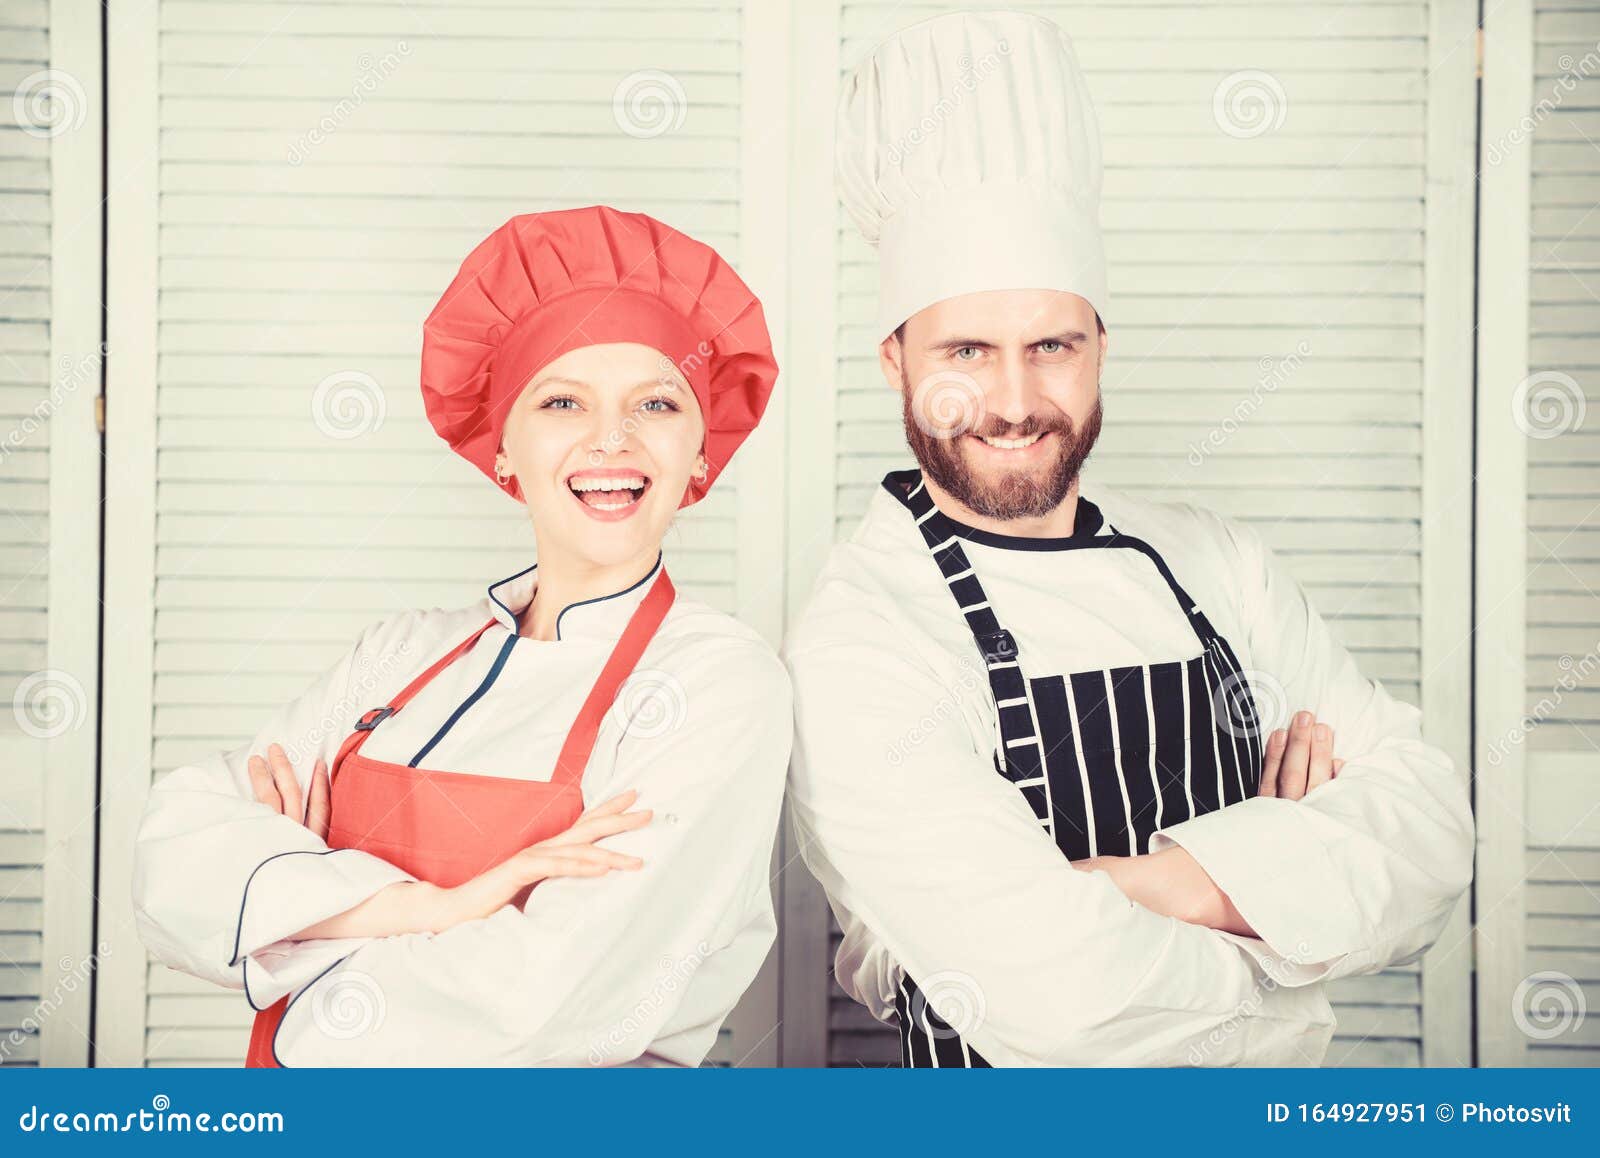 Kitchen Boss. Secret by Recipe. Cook Uniform. Man and Woman Chef in Restaurant. Family Cooking. Menu Planning Image - of couple, 164927951